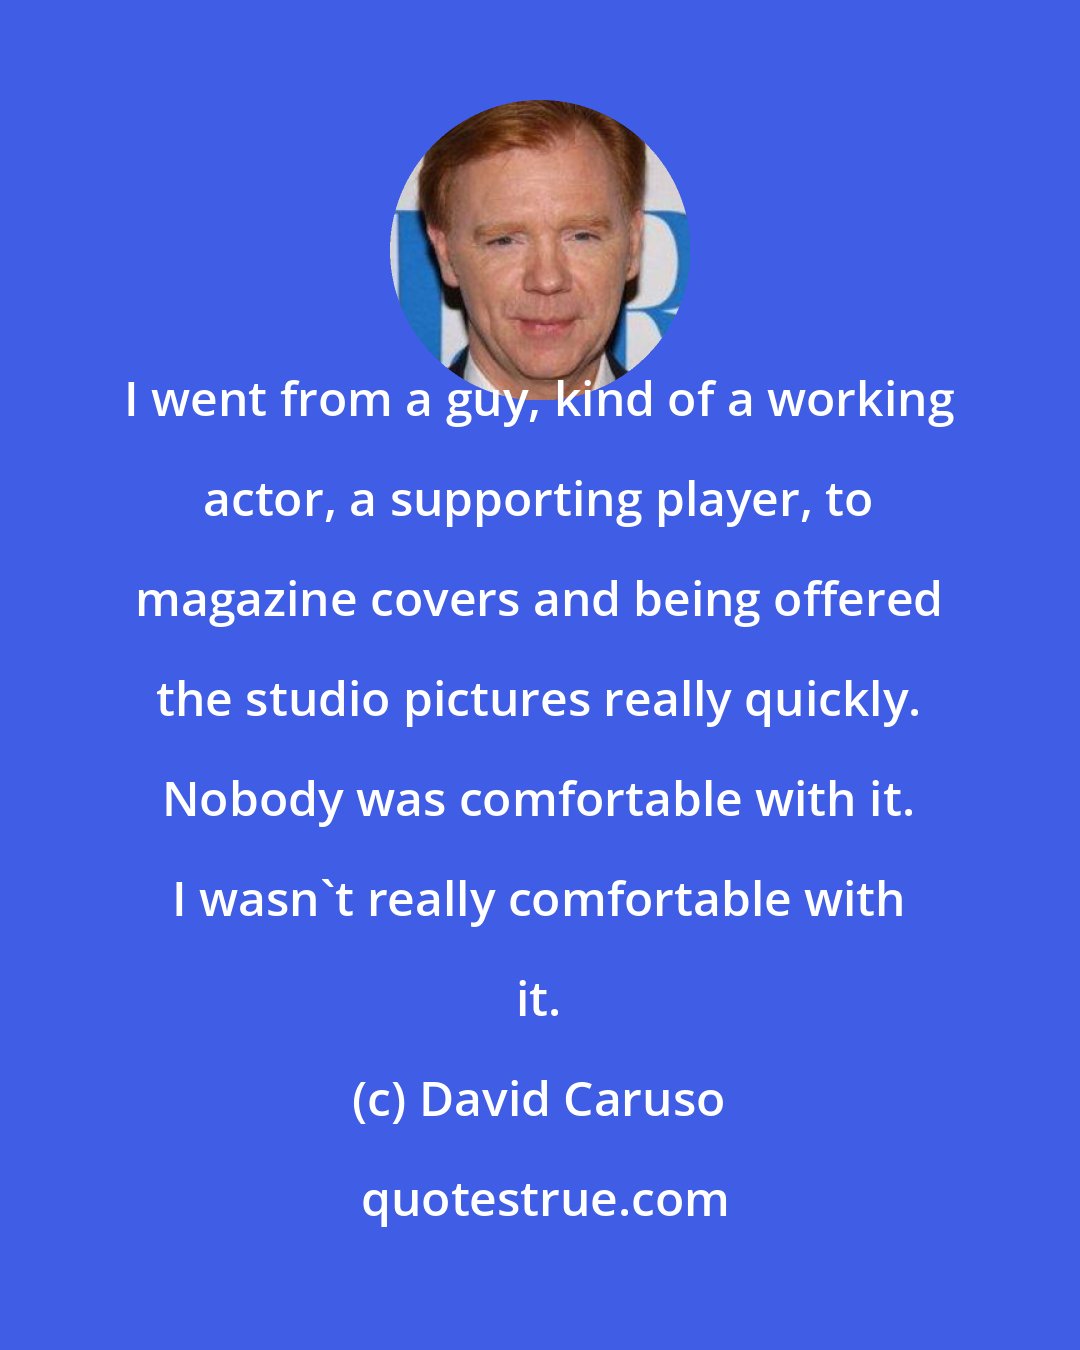 David Caruso: I went from a guy, kind of a working actor, a supporting player, to magazine covers and being offered the studio pictures really quickly. Nobody was comfortable with it. I wasn't really comfortable with it.